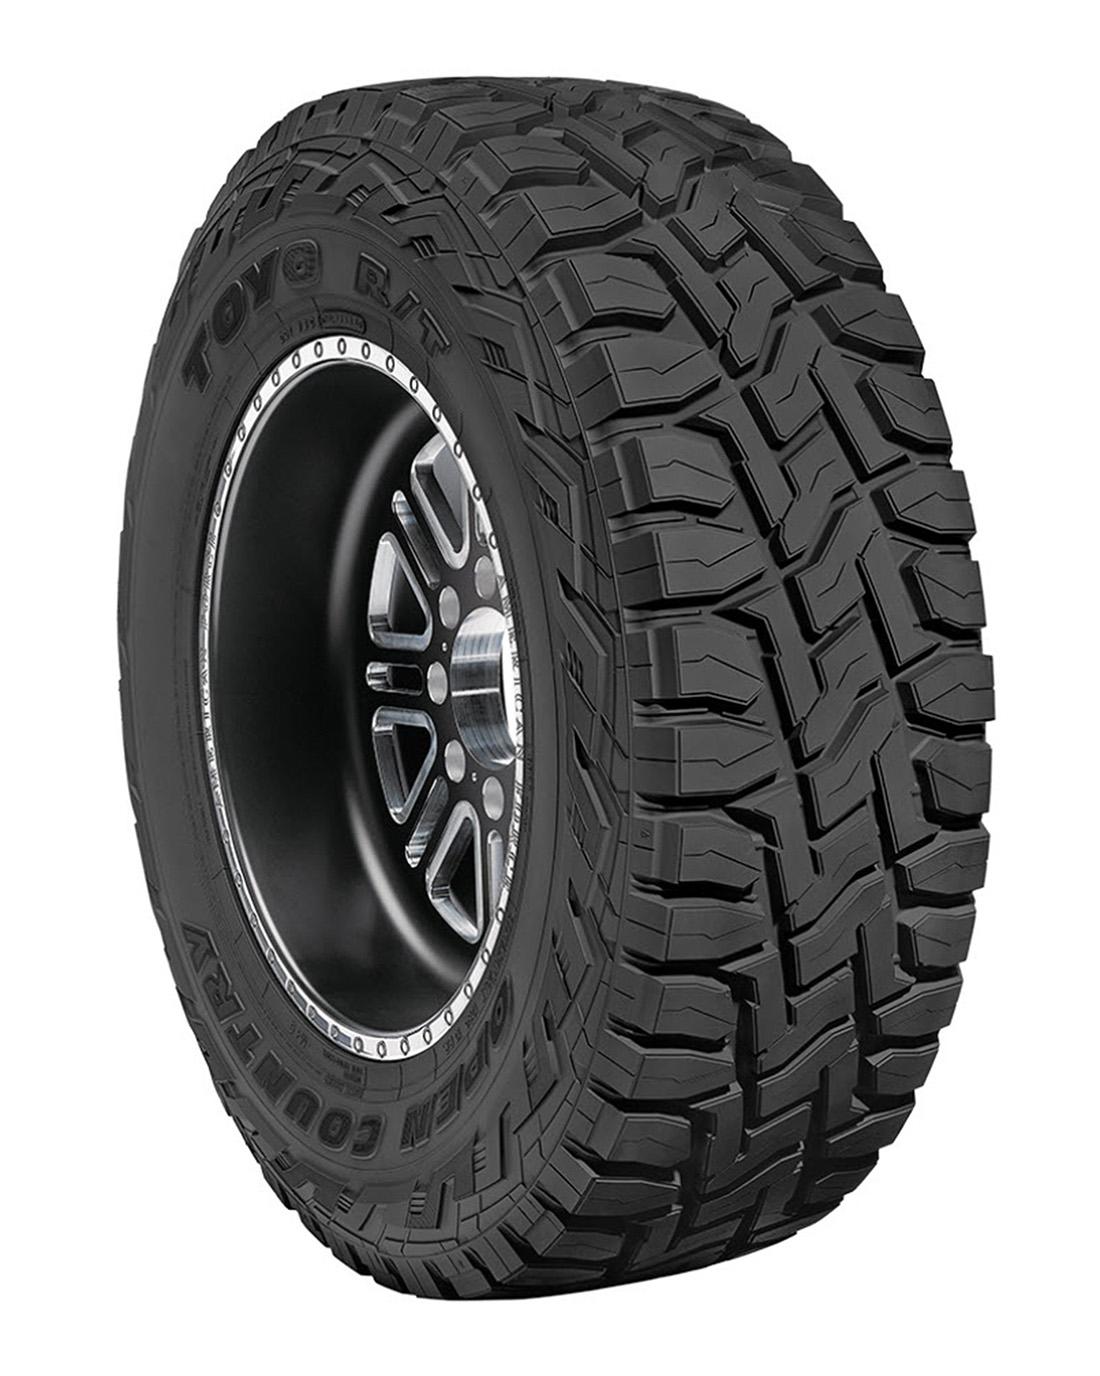 Toyo - OPEN COUNTRY RT  NW  265/70R17